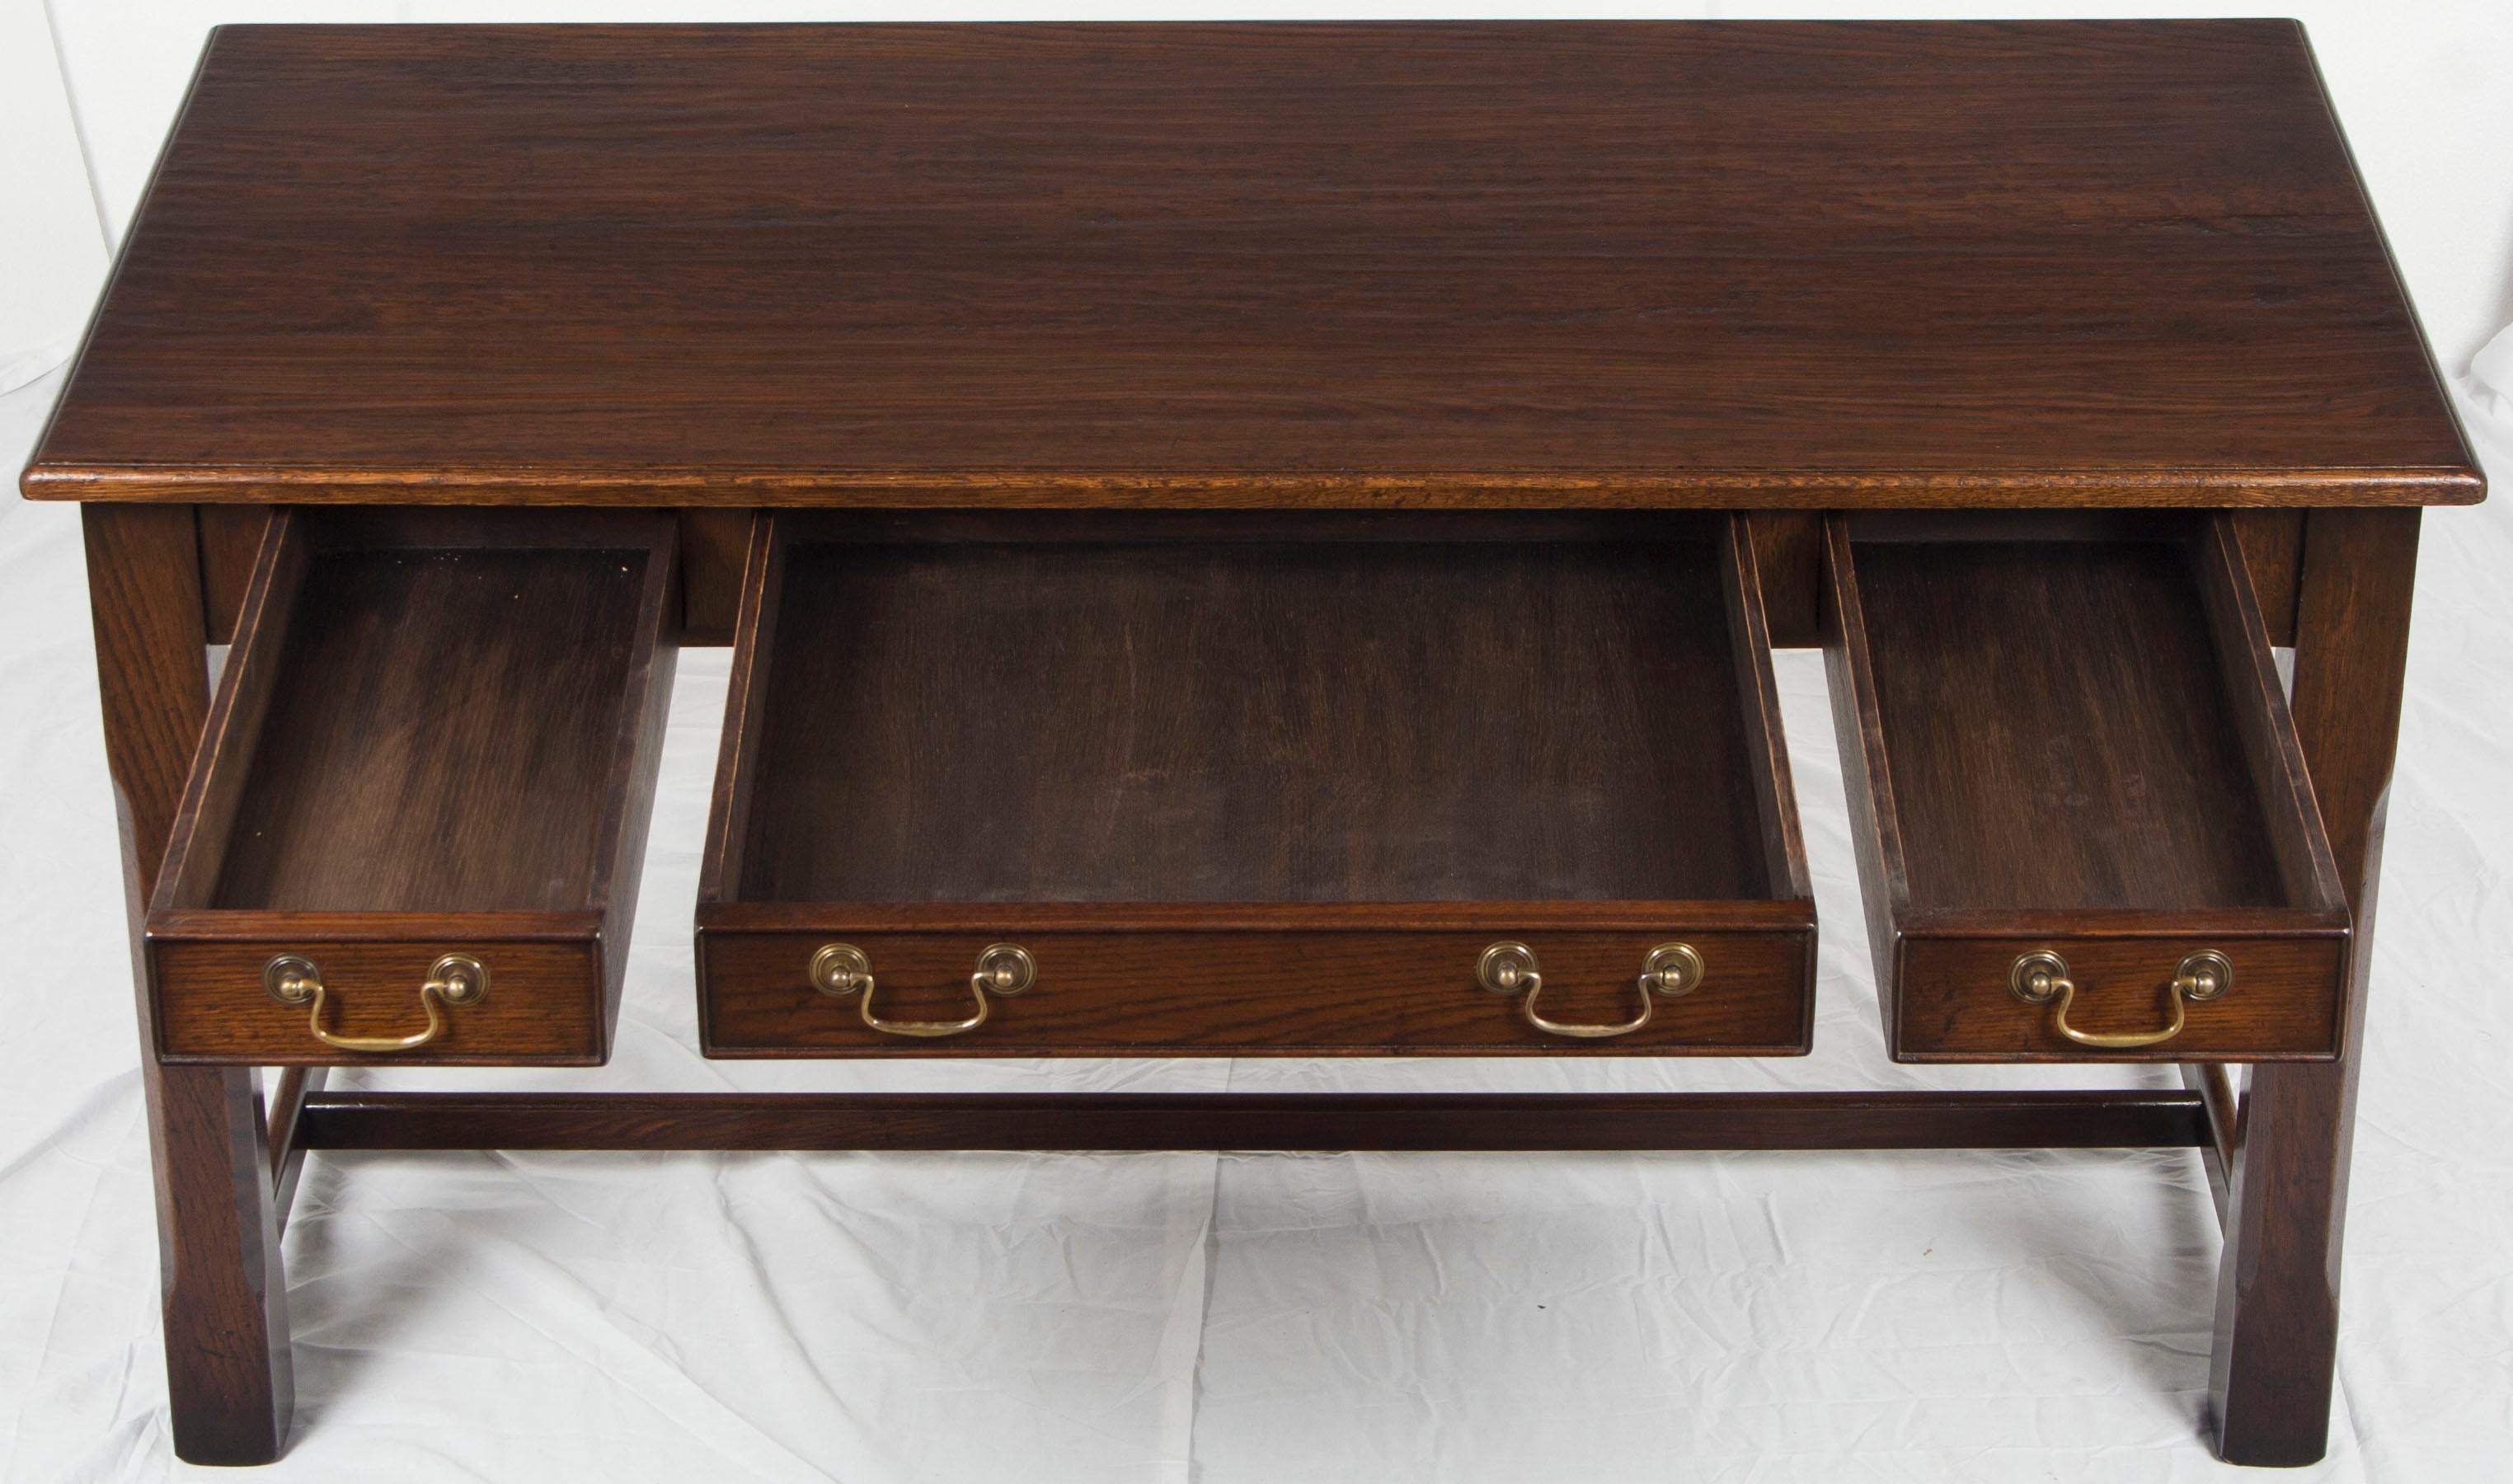 This handcrafted wood top writing desk hails from England. Recently made there, it possesses charm, character, and an heirloom quality you would expect from a master furniture craftsman. Its size allows this table desk to be a great work space in